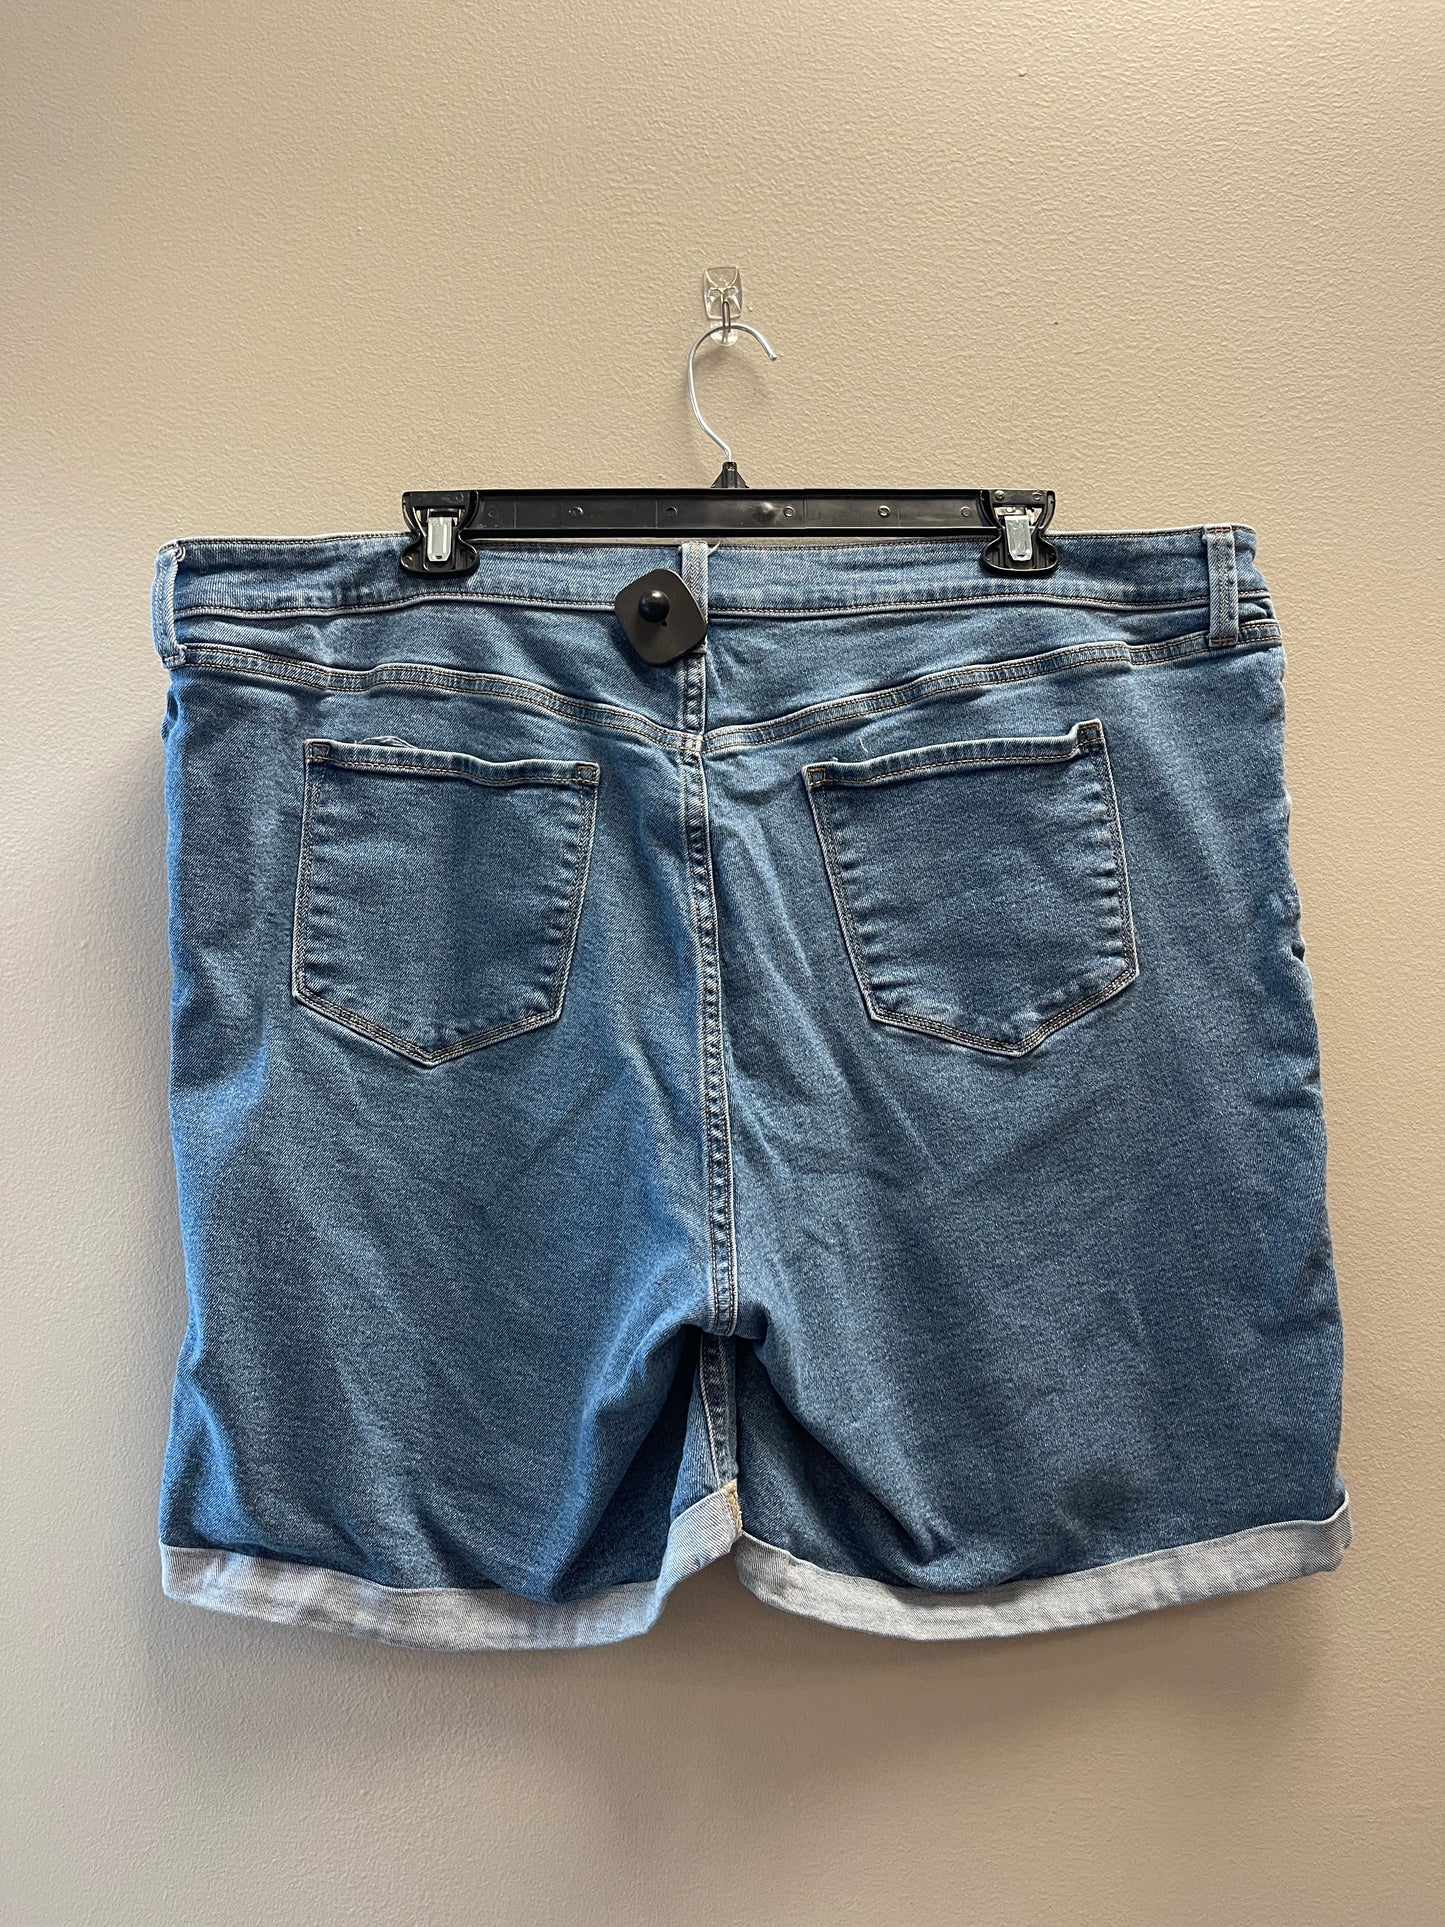 Shorts By Old Navy  Size: 26